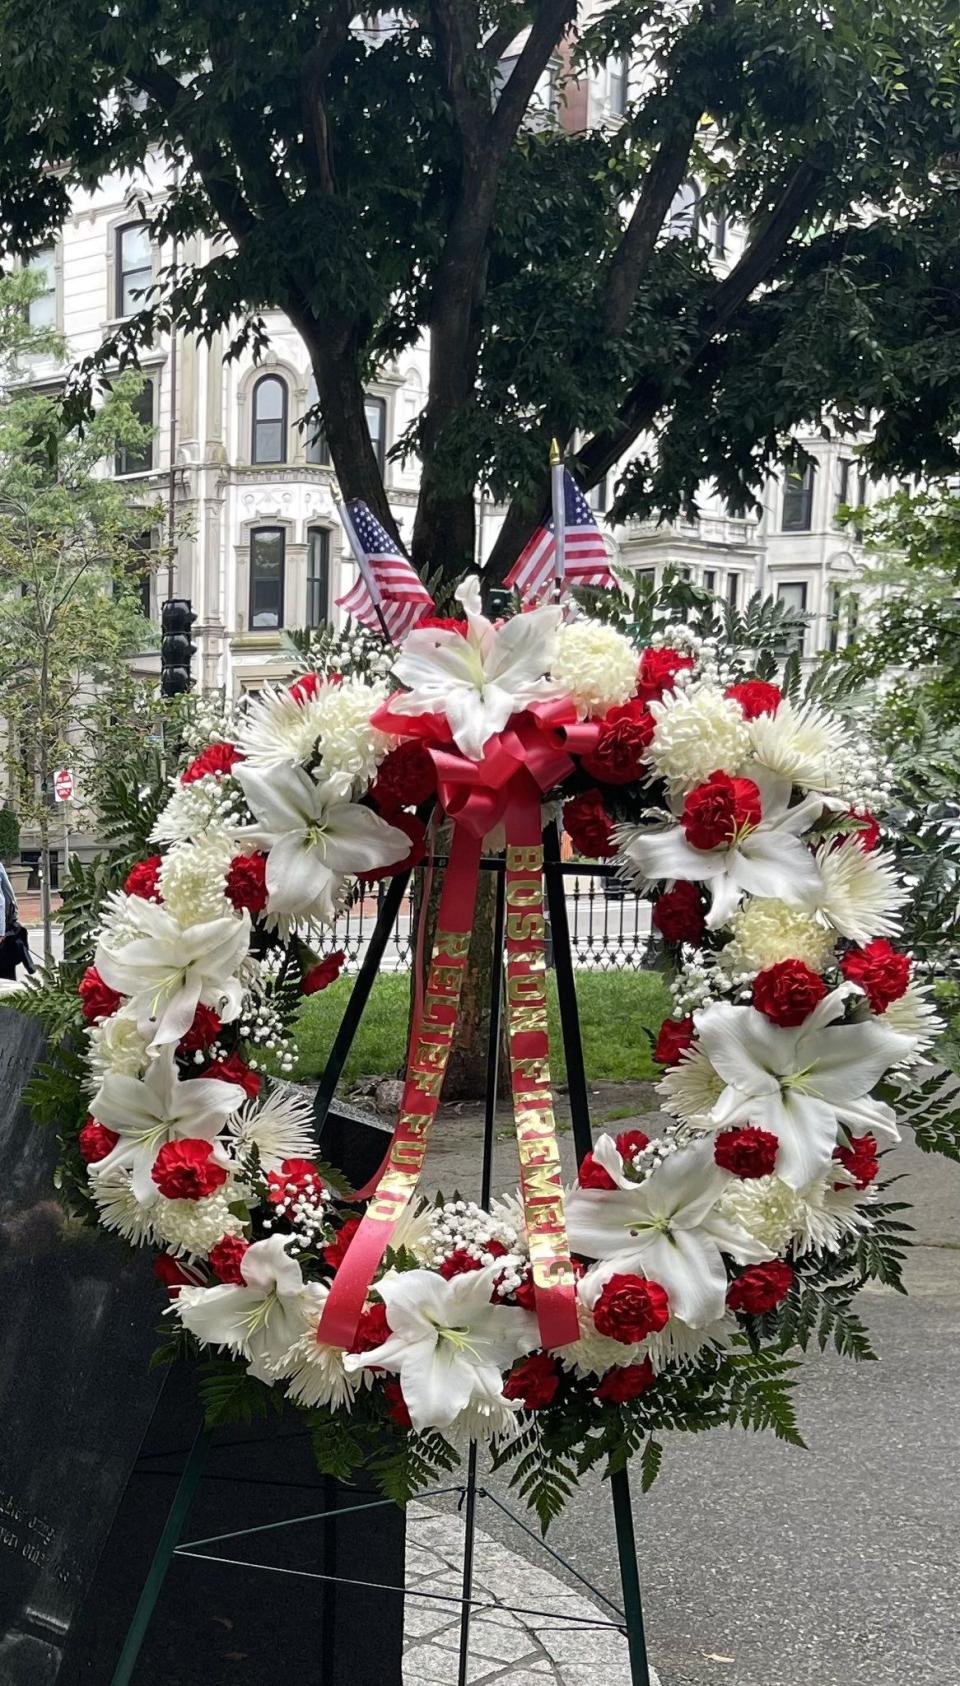 Saturday marked the 51st anniversary of the Hotel Vendome fire on Commonwealth Avenue in Boston on June 17, 1972. Nine firefighters were killed when the entire southeast corner of the building collapsed without warning, burying 25 firefighters and a ladder truck in a pile of debris.